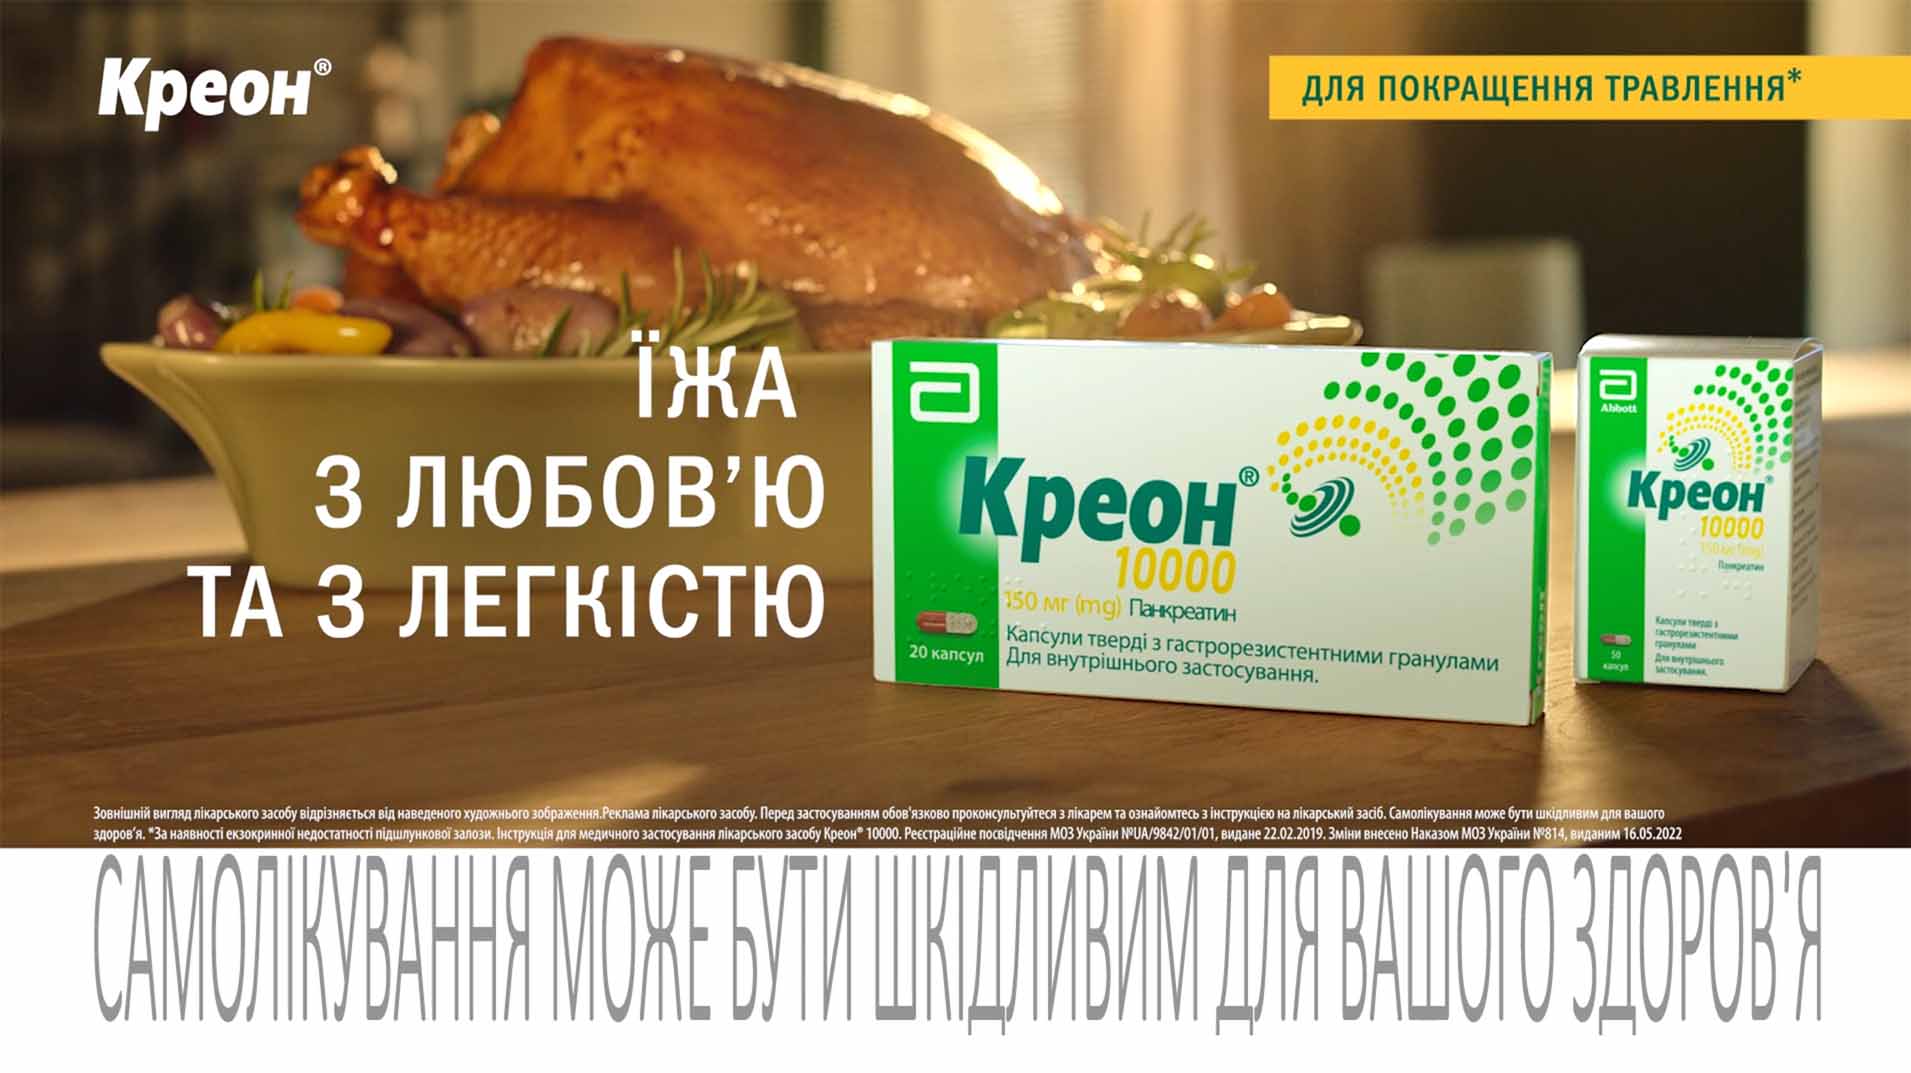 New сampaign for the Creon brand